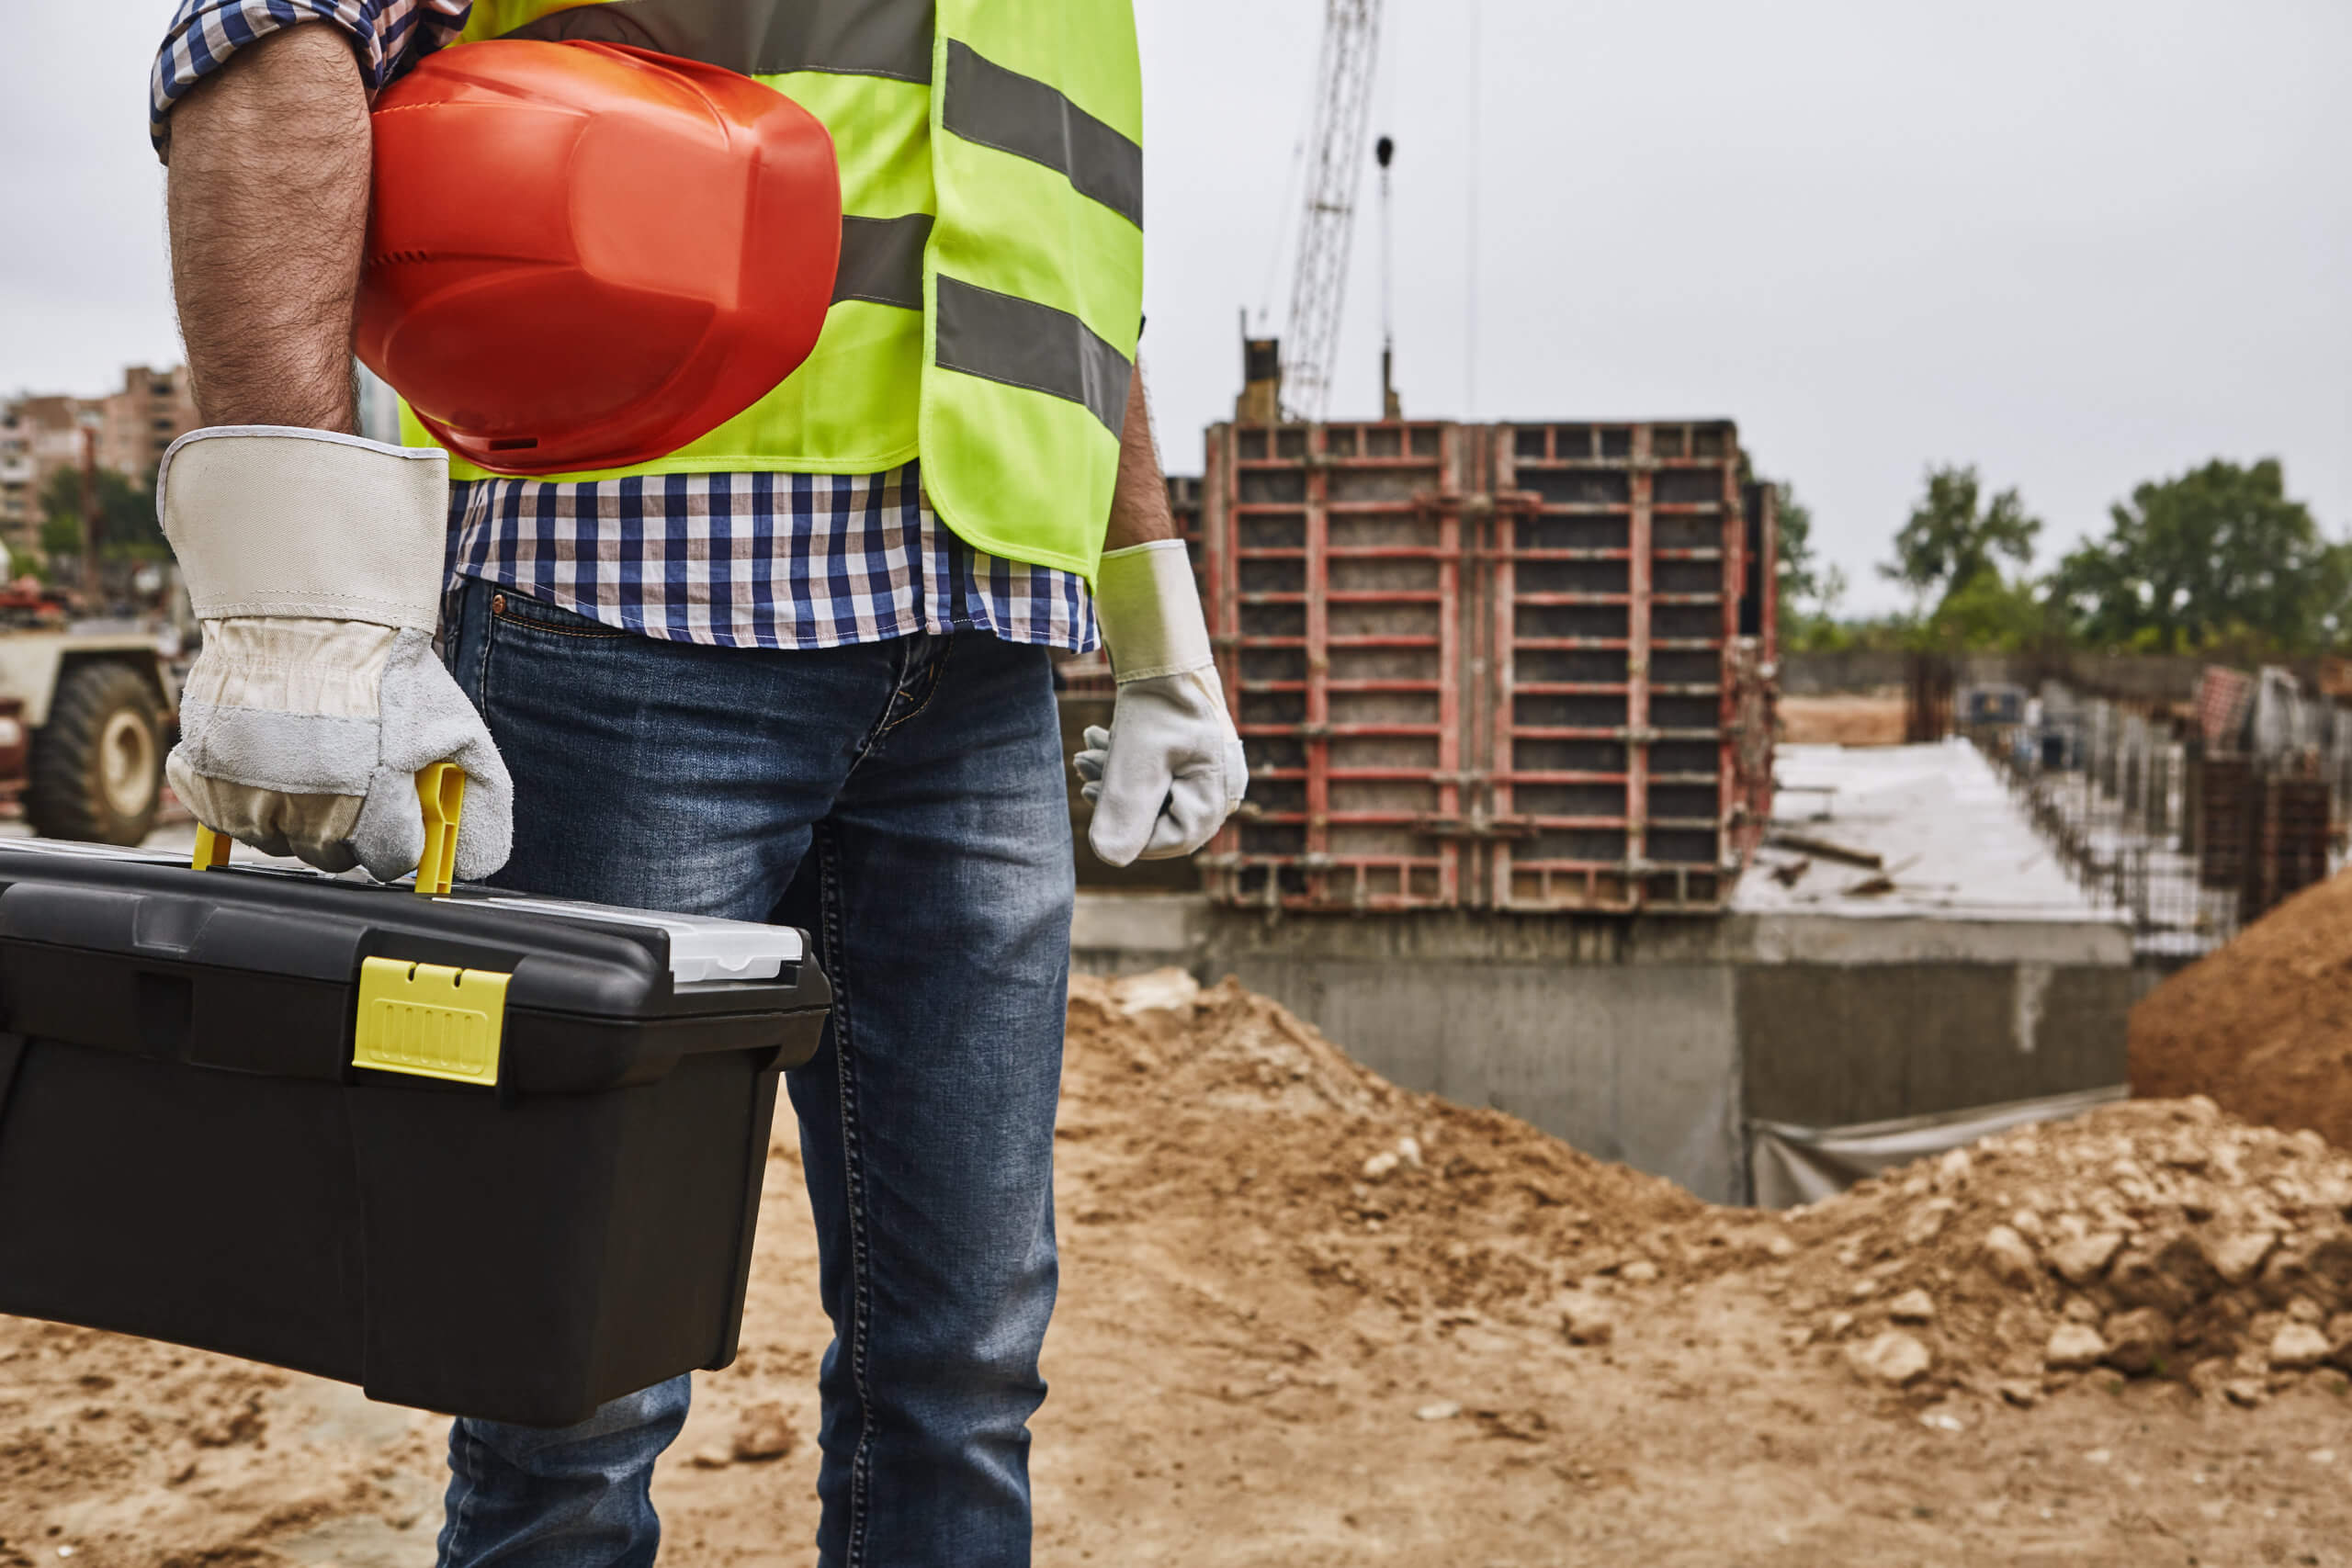 contractor Ready to work! Cropped image of a builder in working uniform holding red helmet and carrying toolbox while standing at construction site. Building concept. Protective gear. Construction concept